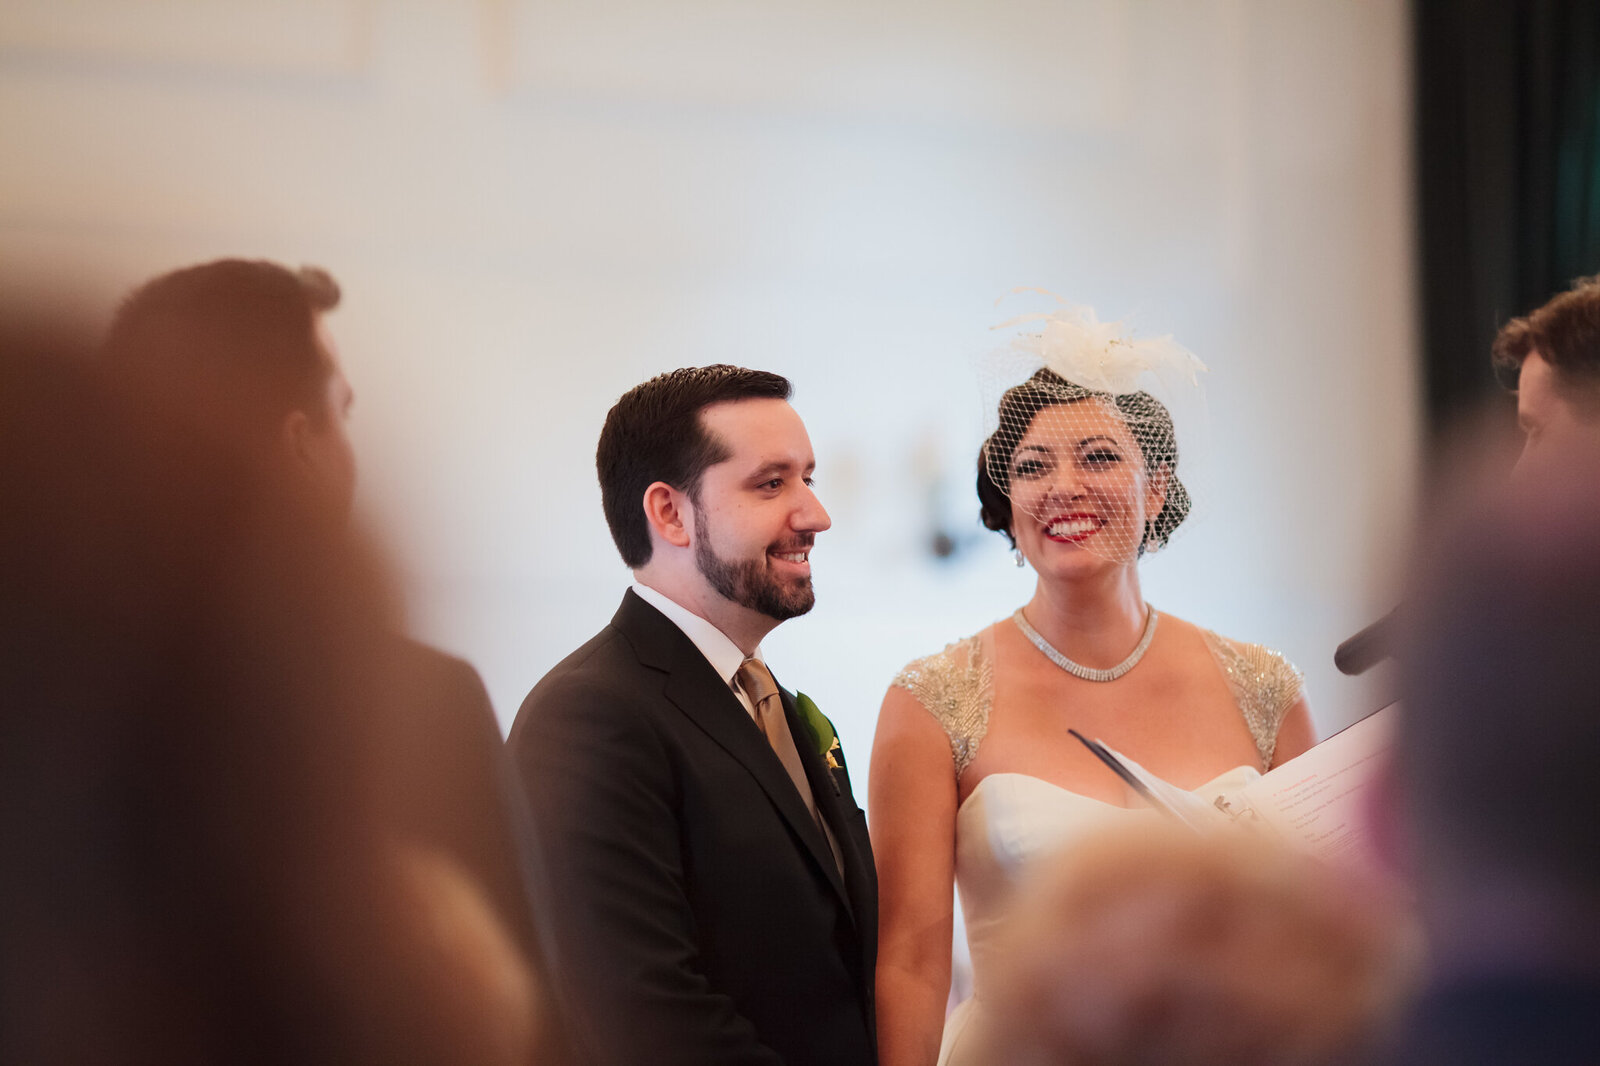 Bride and groom smile during wedding ceremony